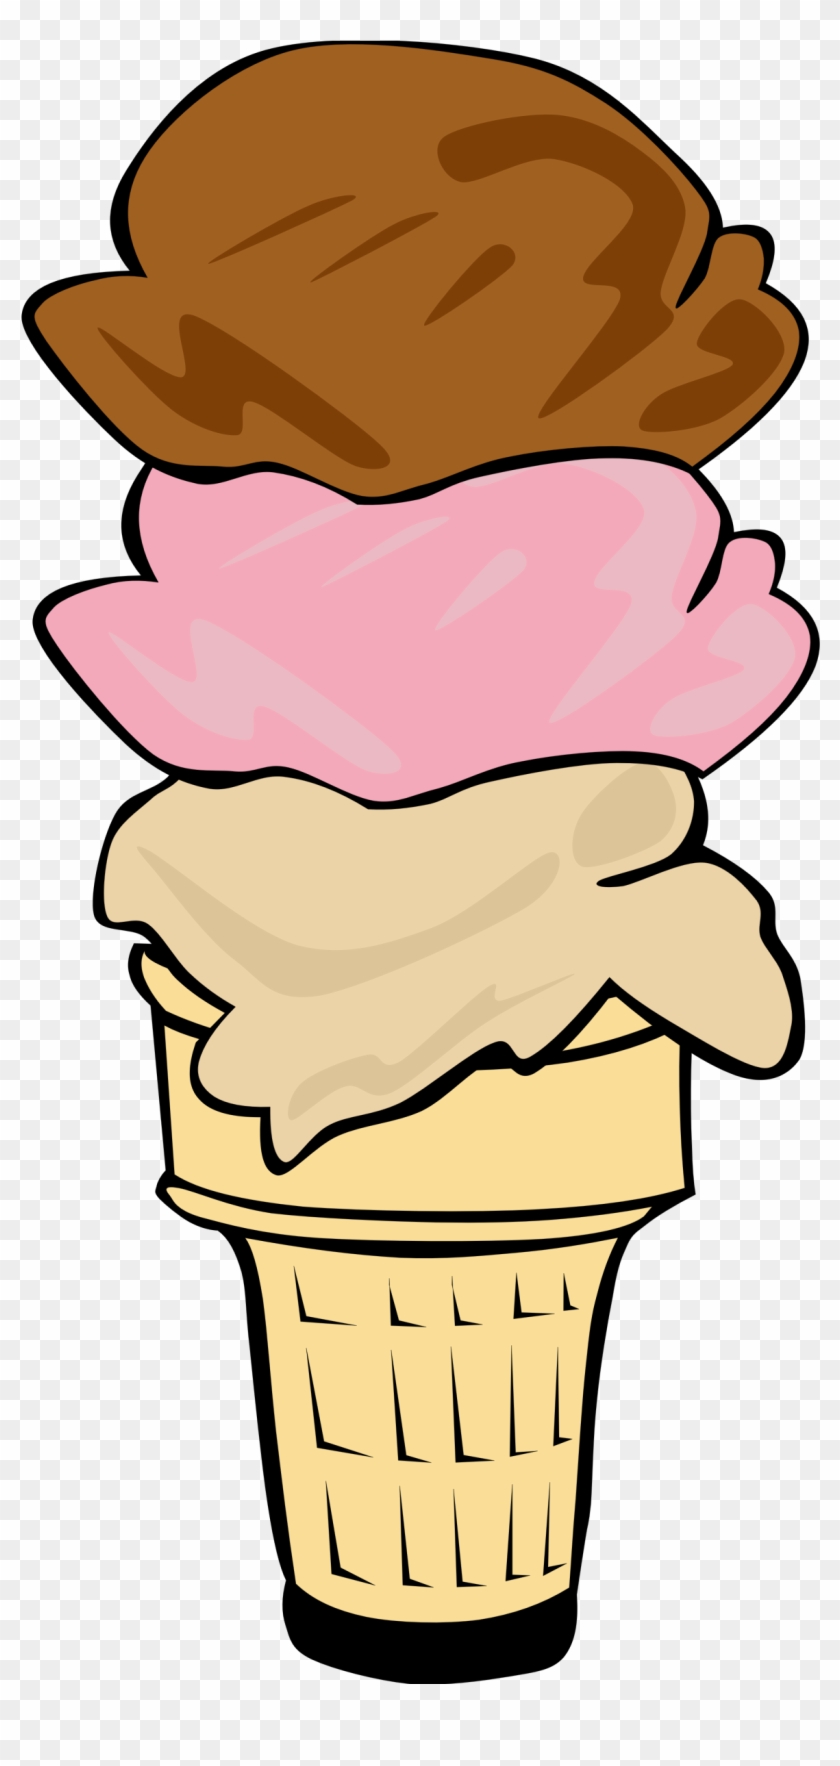 Food And Drink Clipart - Ice Cream Cone Clip Art #55028